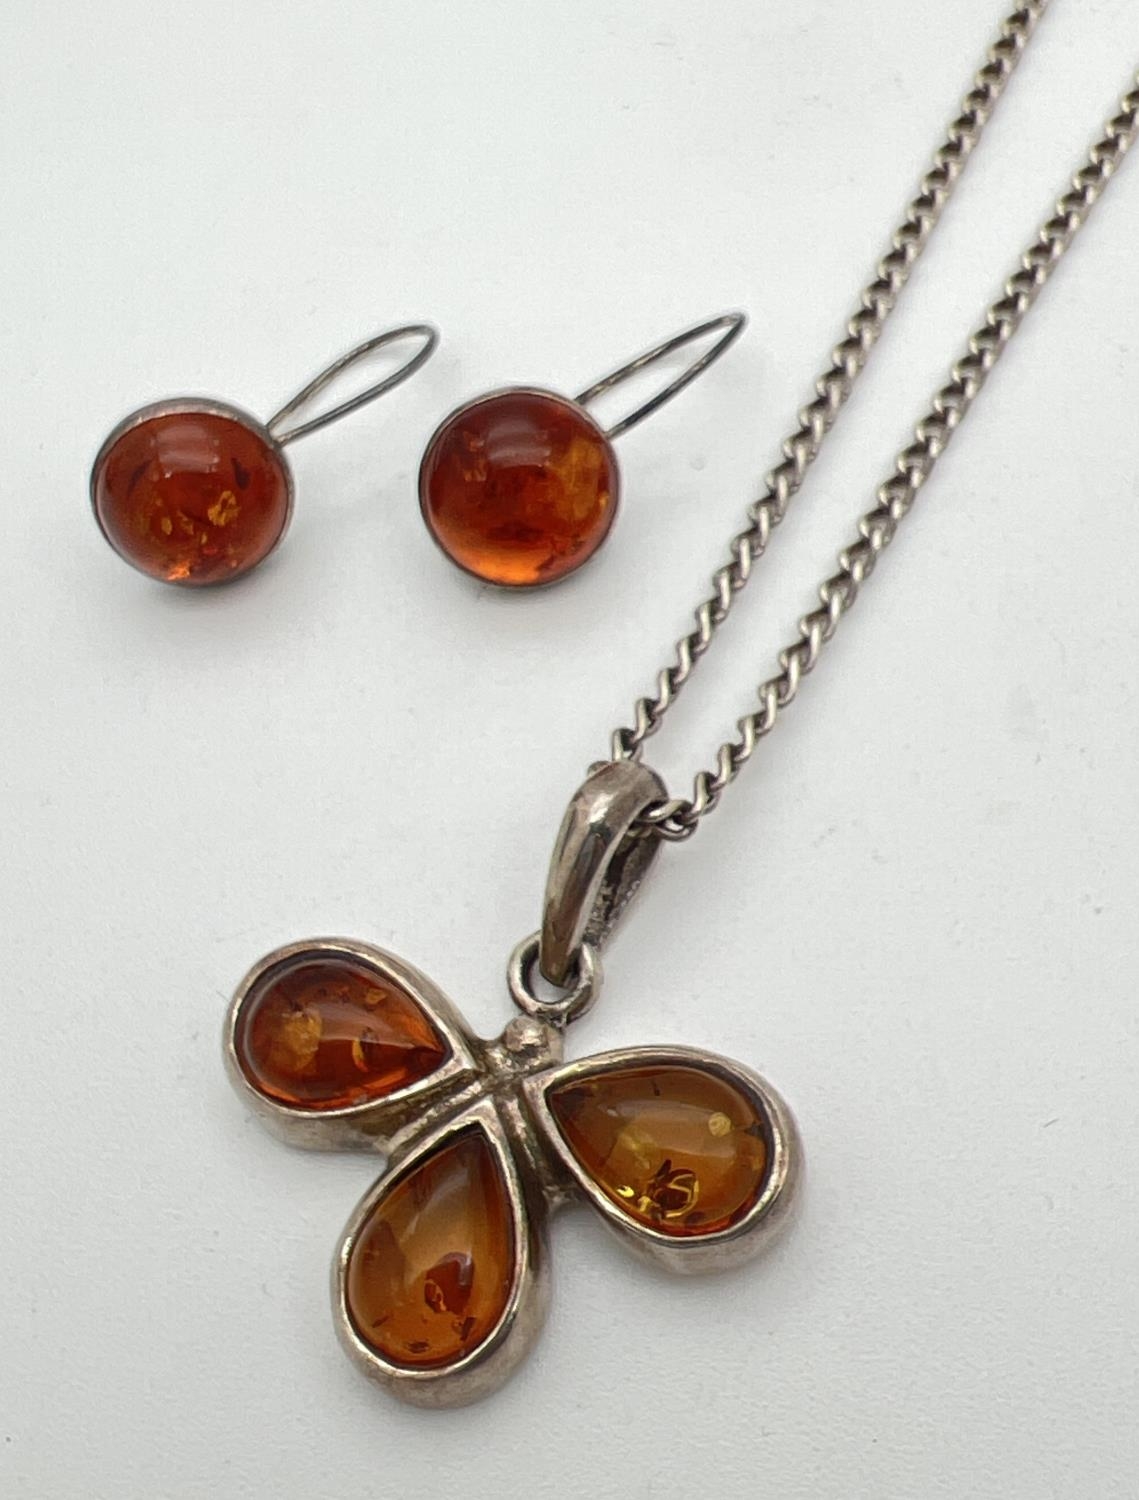 A flower design silver and amber pendant on a 20 inch curb chain with spring ring clasp. Together